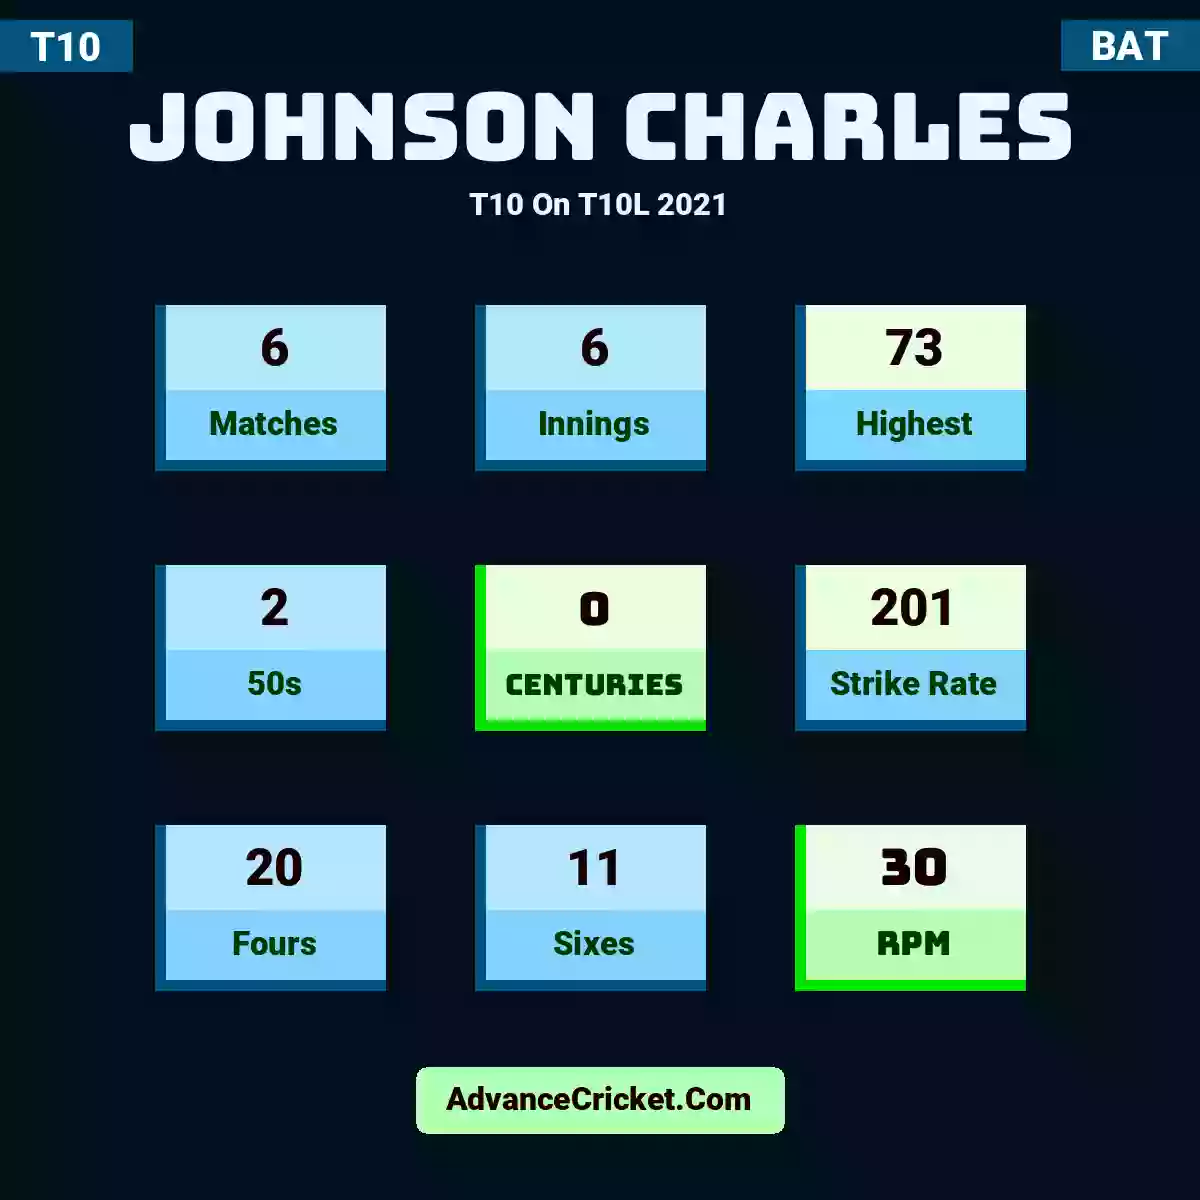 Johnson Charles T10  On T10L 2021, Johnson Charles played 6 matches, scored 73 runs as highest, 2 half-centuries, and 0 centuries, with a strike rate of 201. J.Charles hit 20 fours and 11 sixes, with an RPM of 30.